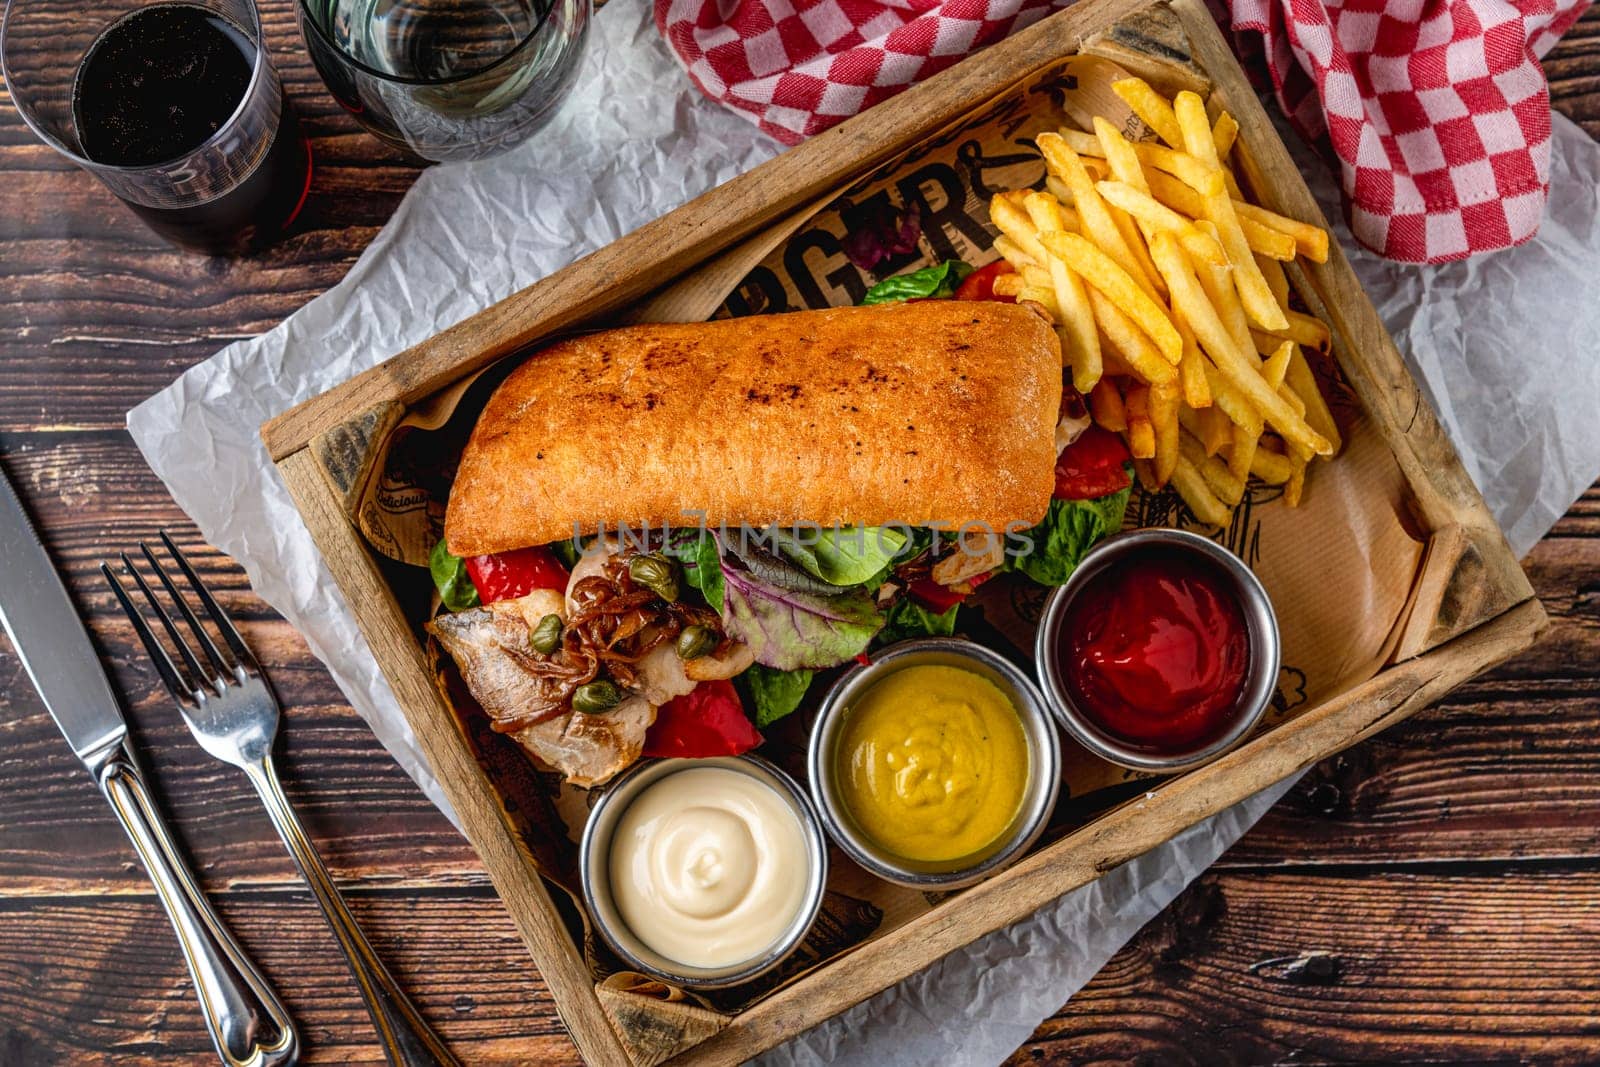 Steak sandwich with sauces and french fries on wooden table by Sonat